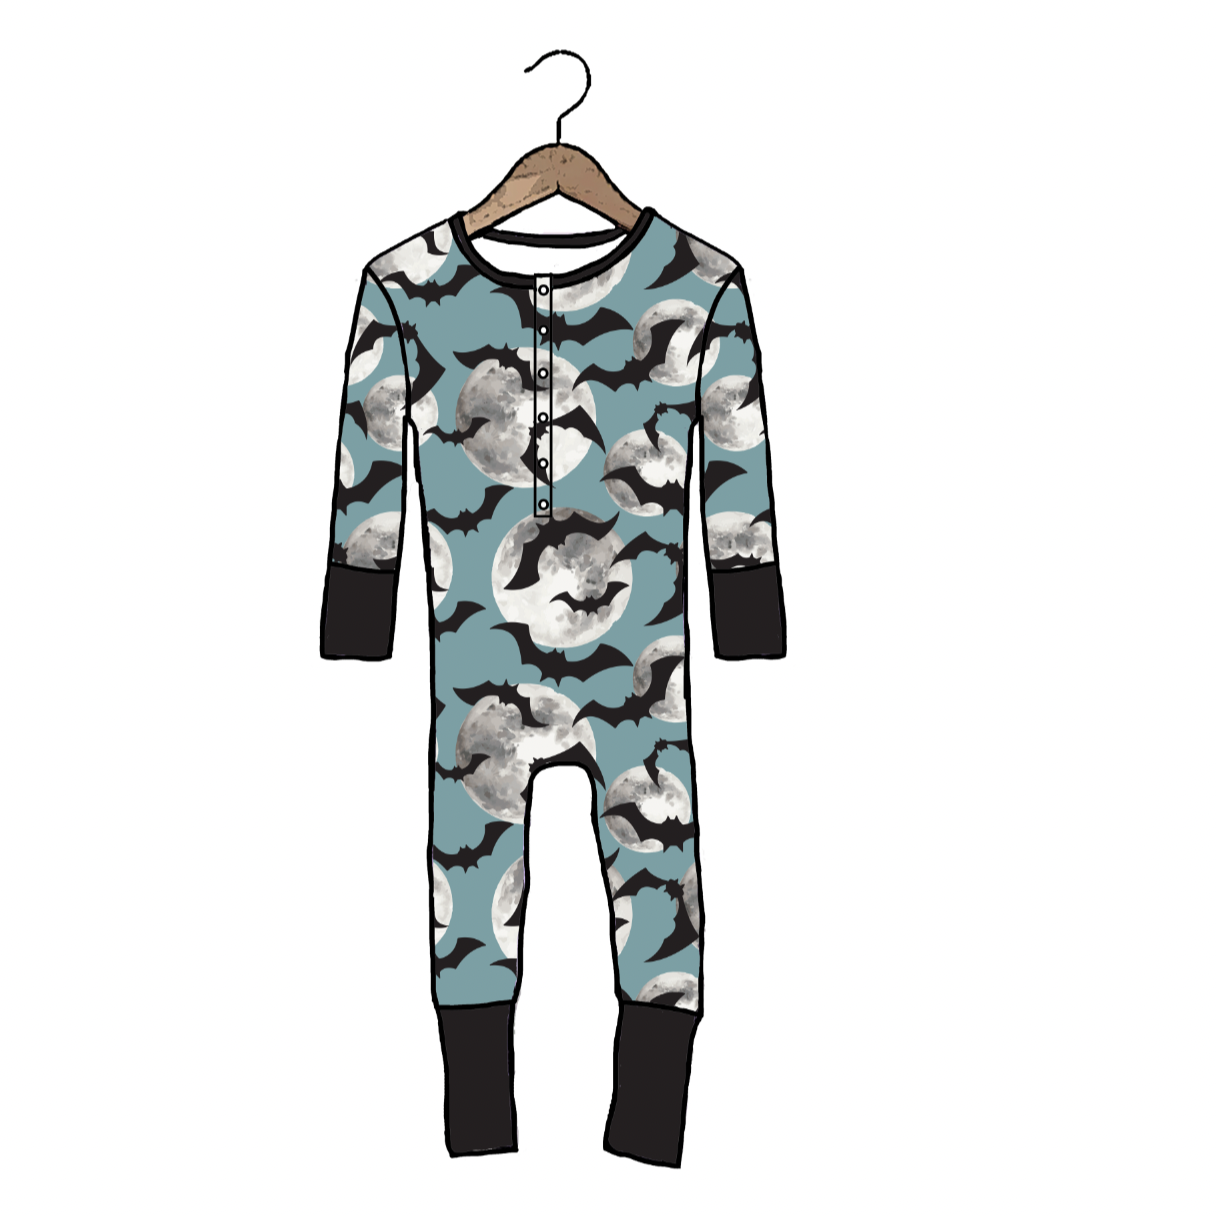 Go Bat to Sleep At Your Leisure Snap Down Adult Romper- 3X-5X